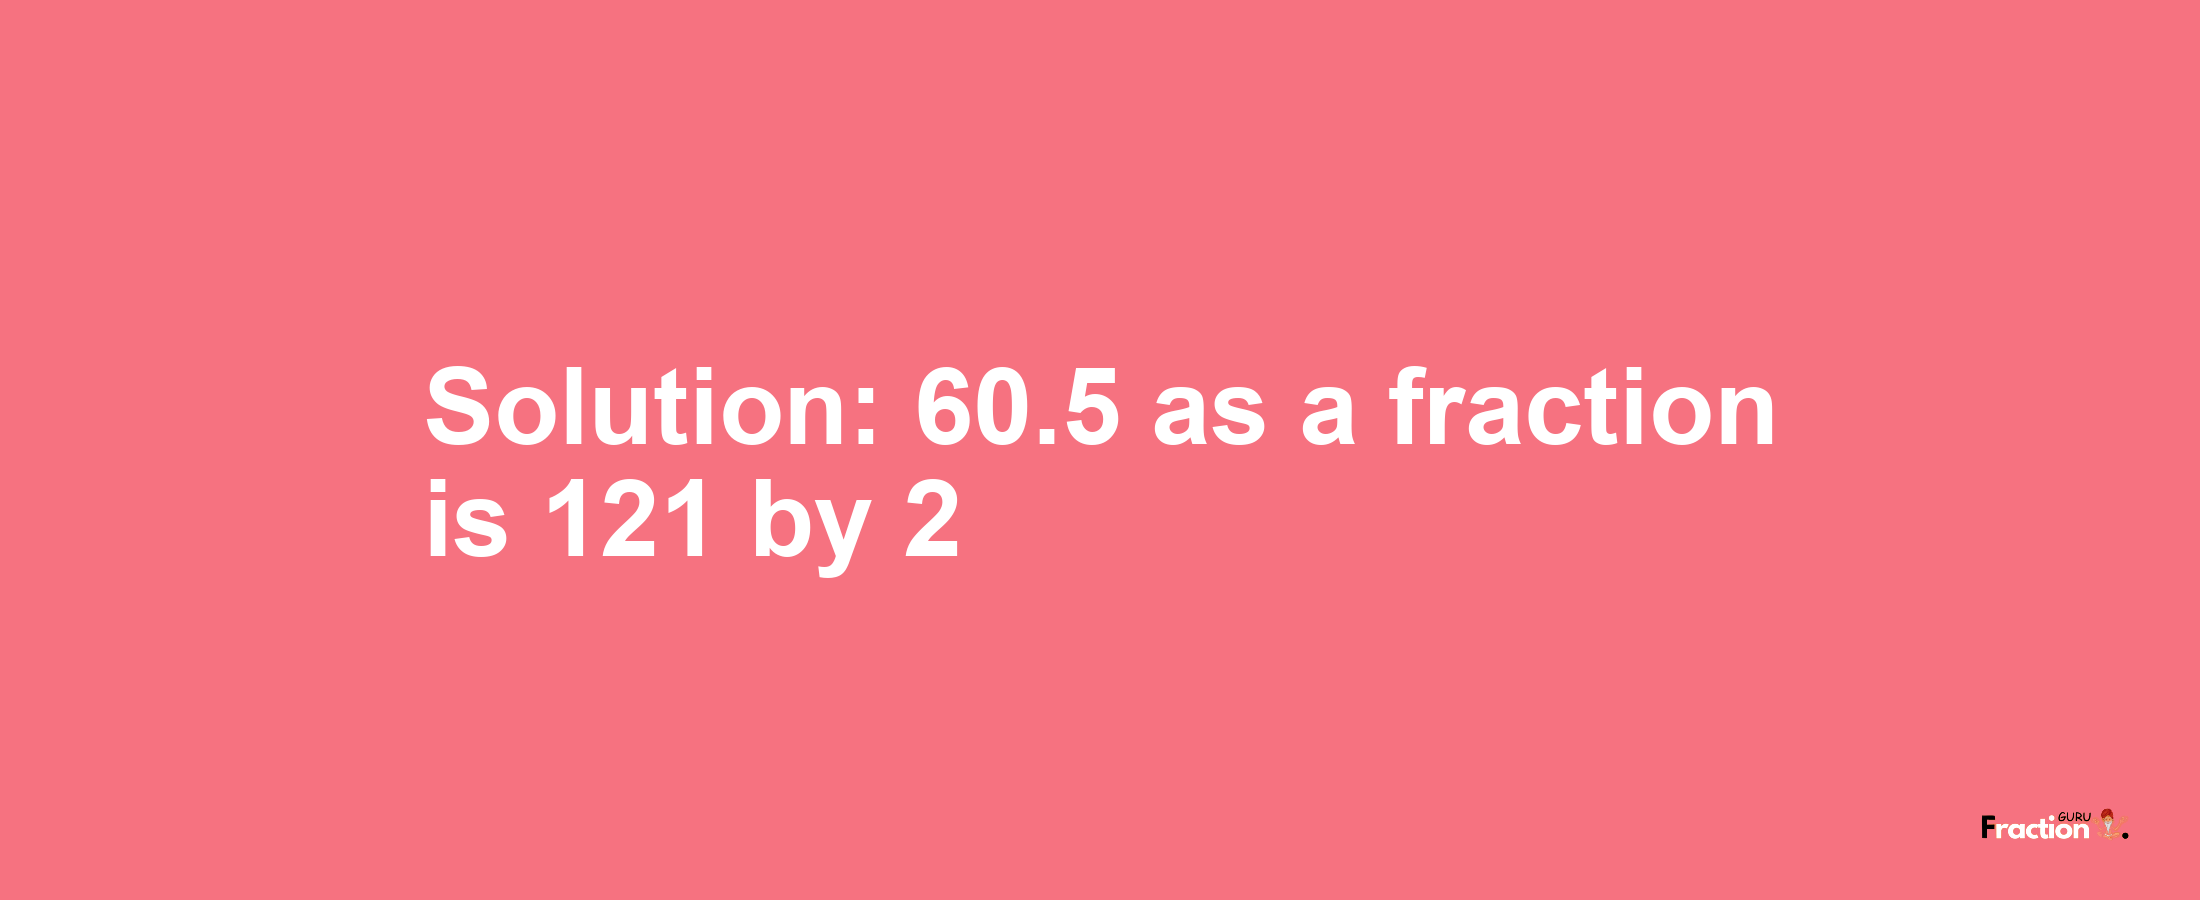 Solution:60.5 as a fraction is 121/2